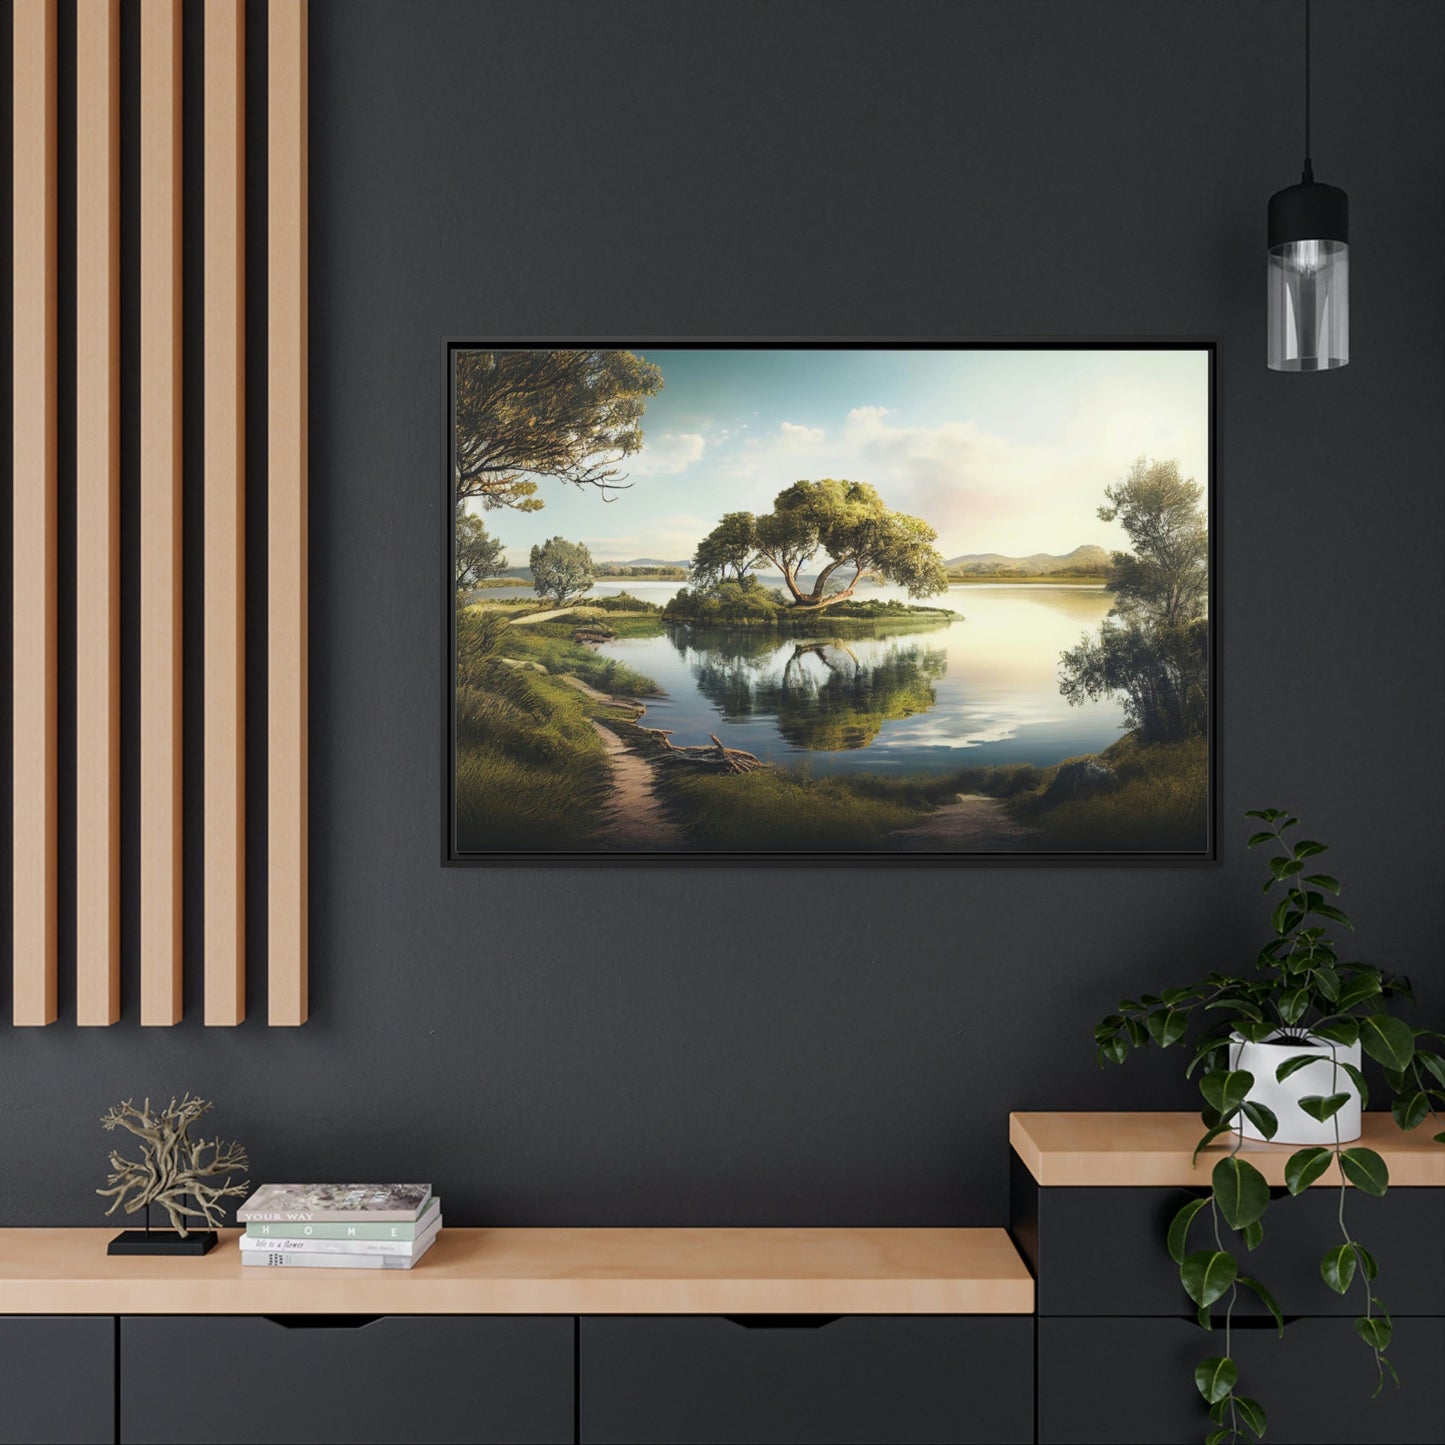 Lakeside Beauty: Print on Canvas of a Gorgeous Lake View